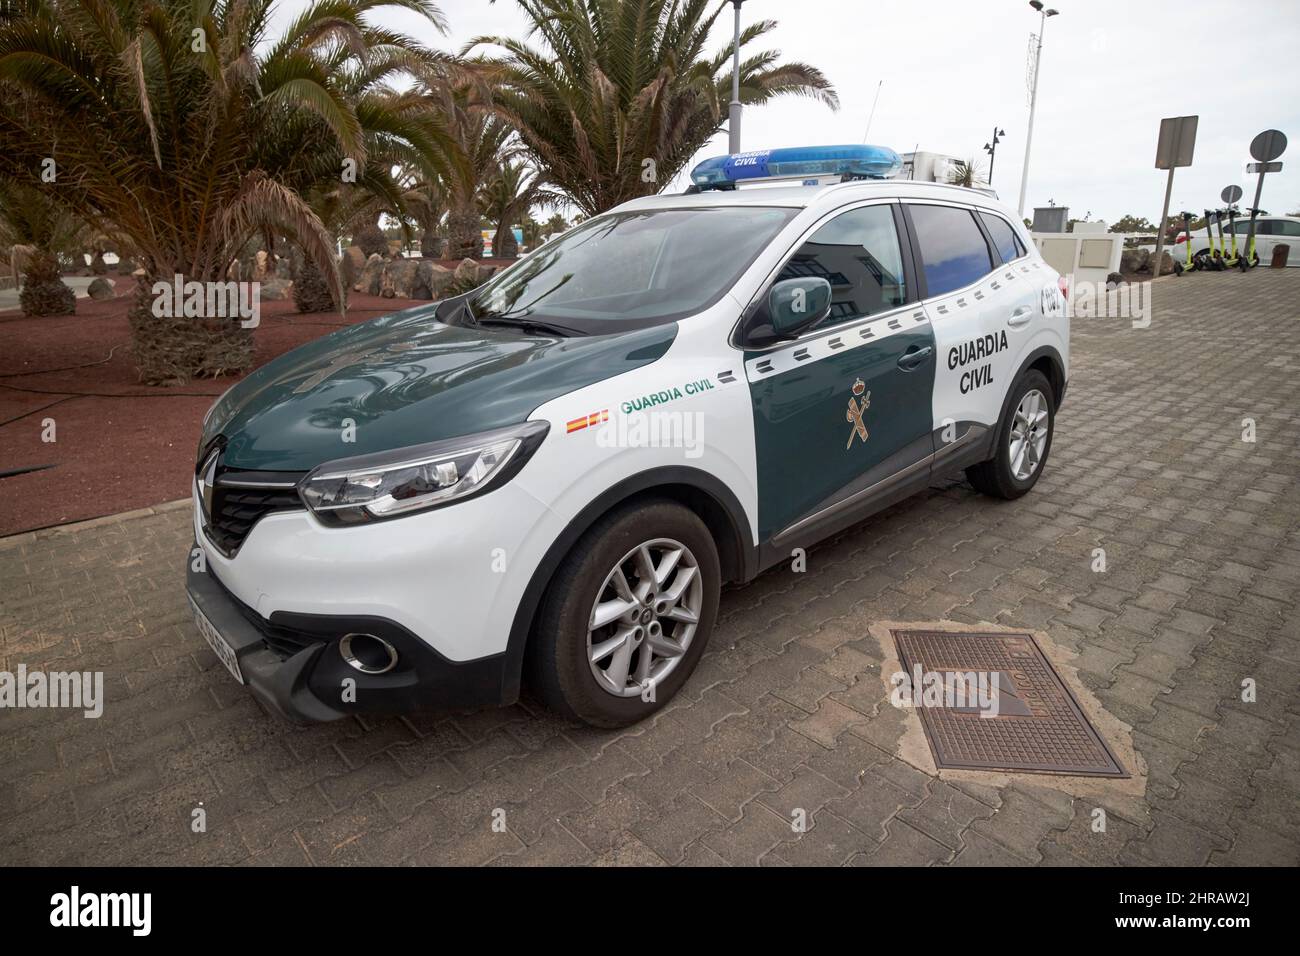 guardia civil national police force patrol vehicle Lanzarote, Canary Islands, Spain Stock Photo